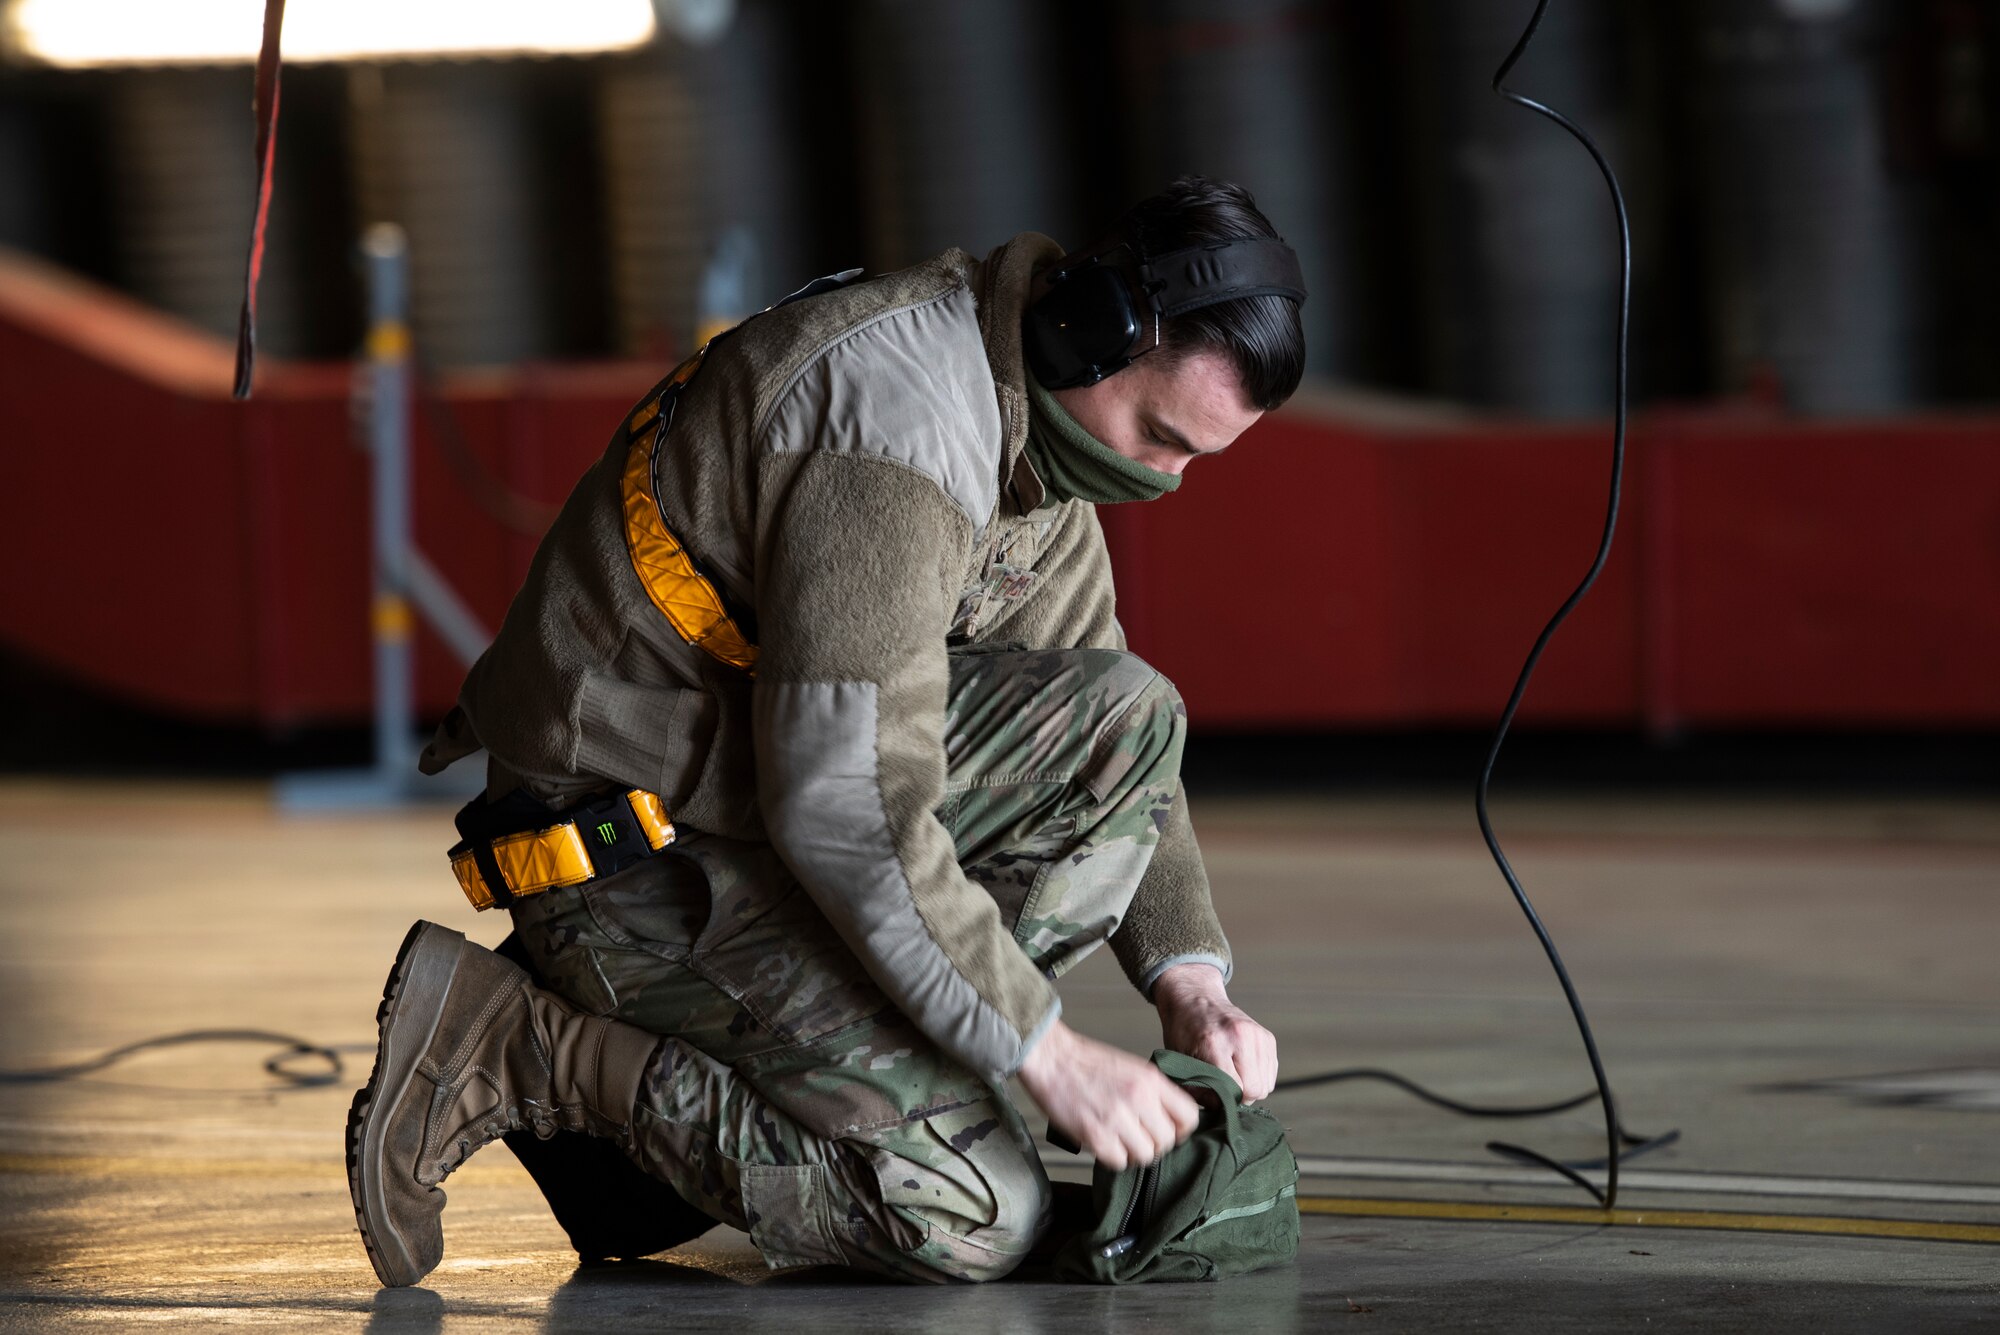 U.S. Air Force Senior Airman Dylan Tyler, 748th Aircraft Maintenance Squadron weapons load crew member, performs pre-flight checks on an F-15C Eagle prior to take-offs in support of exercise Crimson Warrior at Royal Air Force Lakenheath, England, Nov. 4, 2020. Multi-domain integration exercises like Crimson Warrior strengthen NATO interoperability and test high-end capabilities in a contested, degraded, and operationally limited environment. (U.S. Air Force photo by Airman 1st Class Jessi Monte)